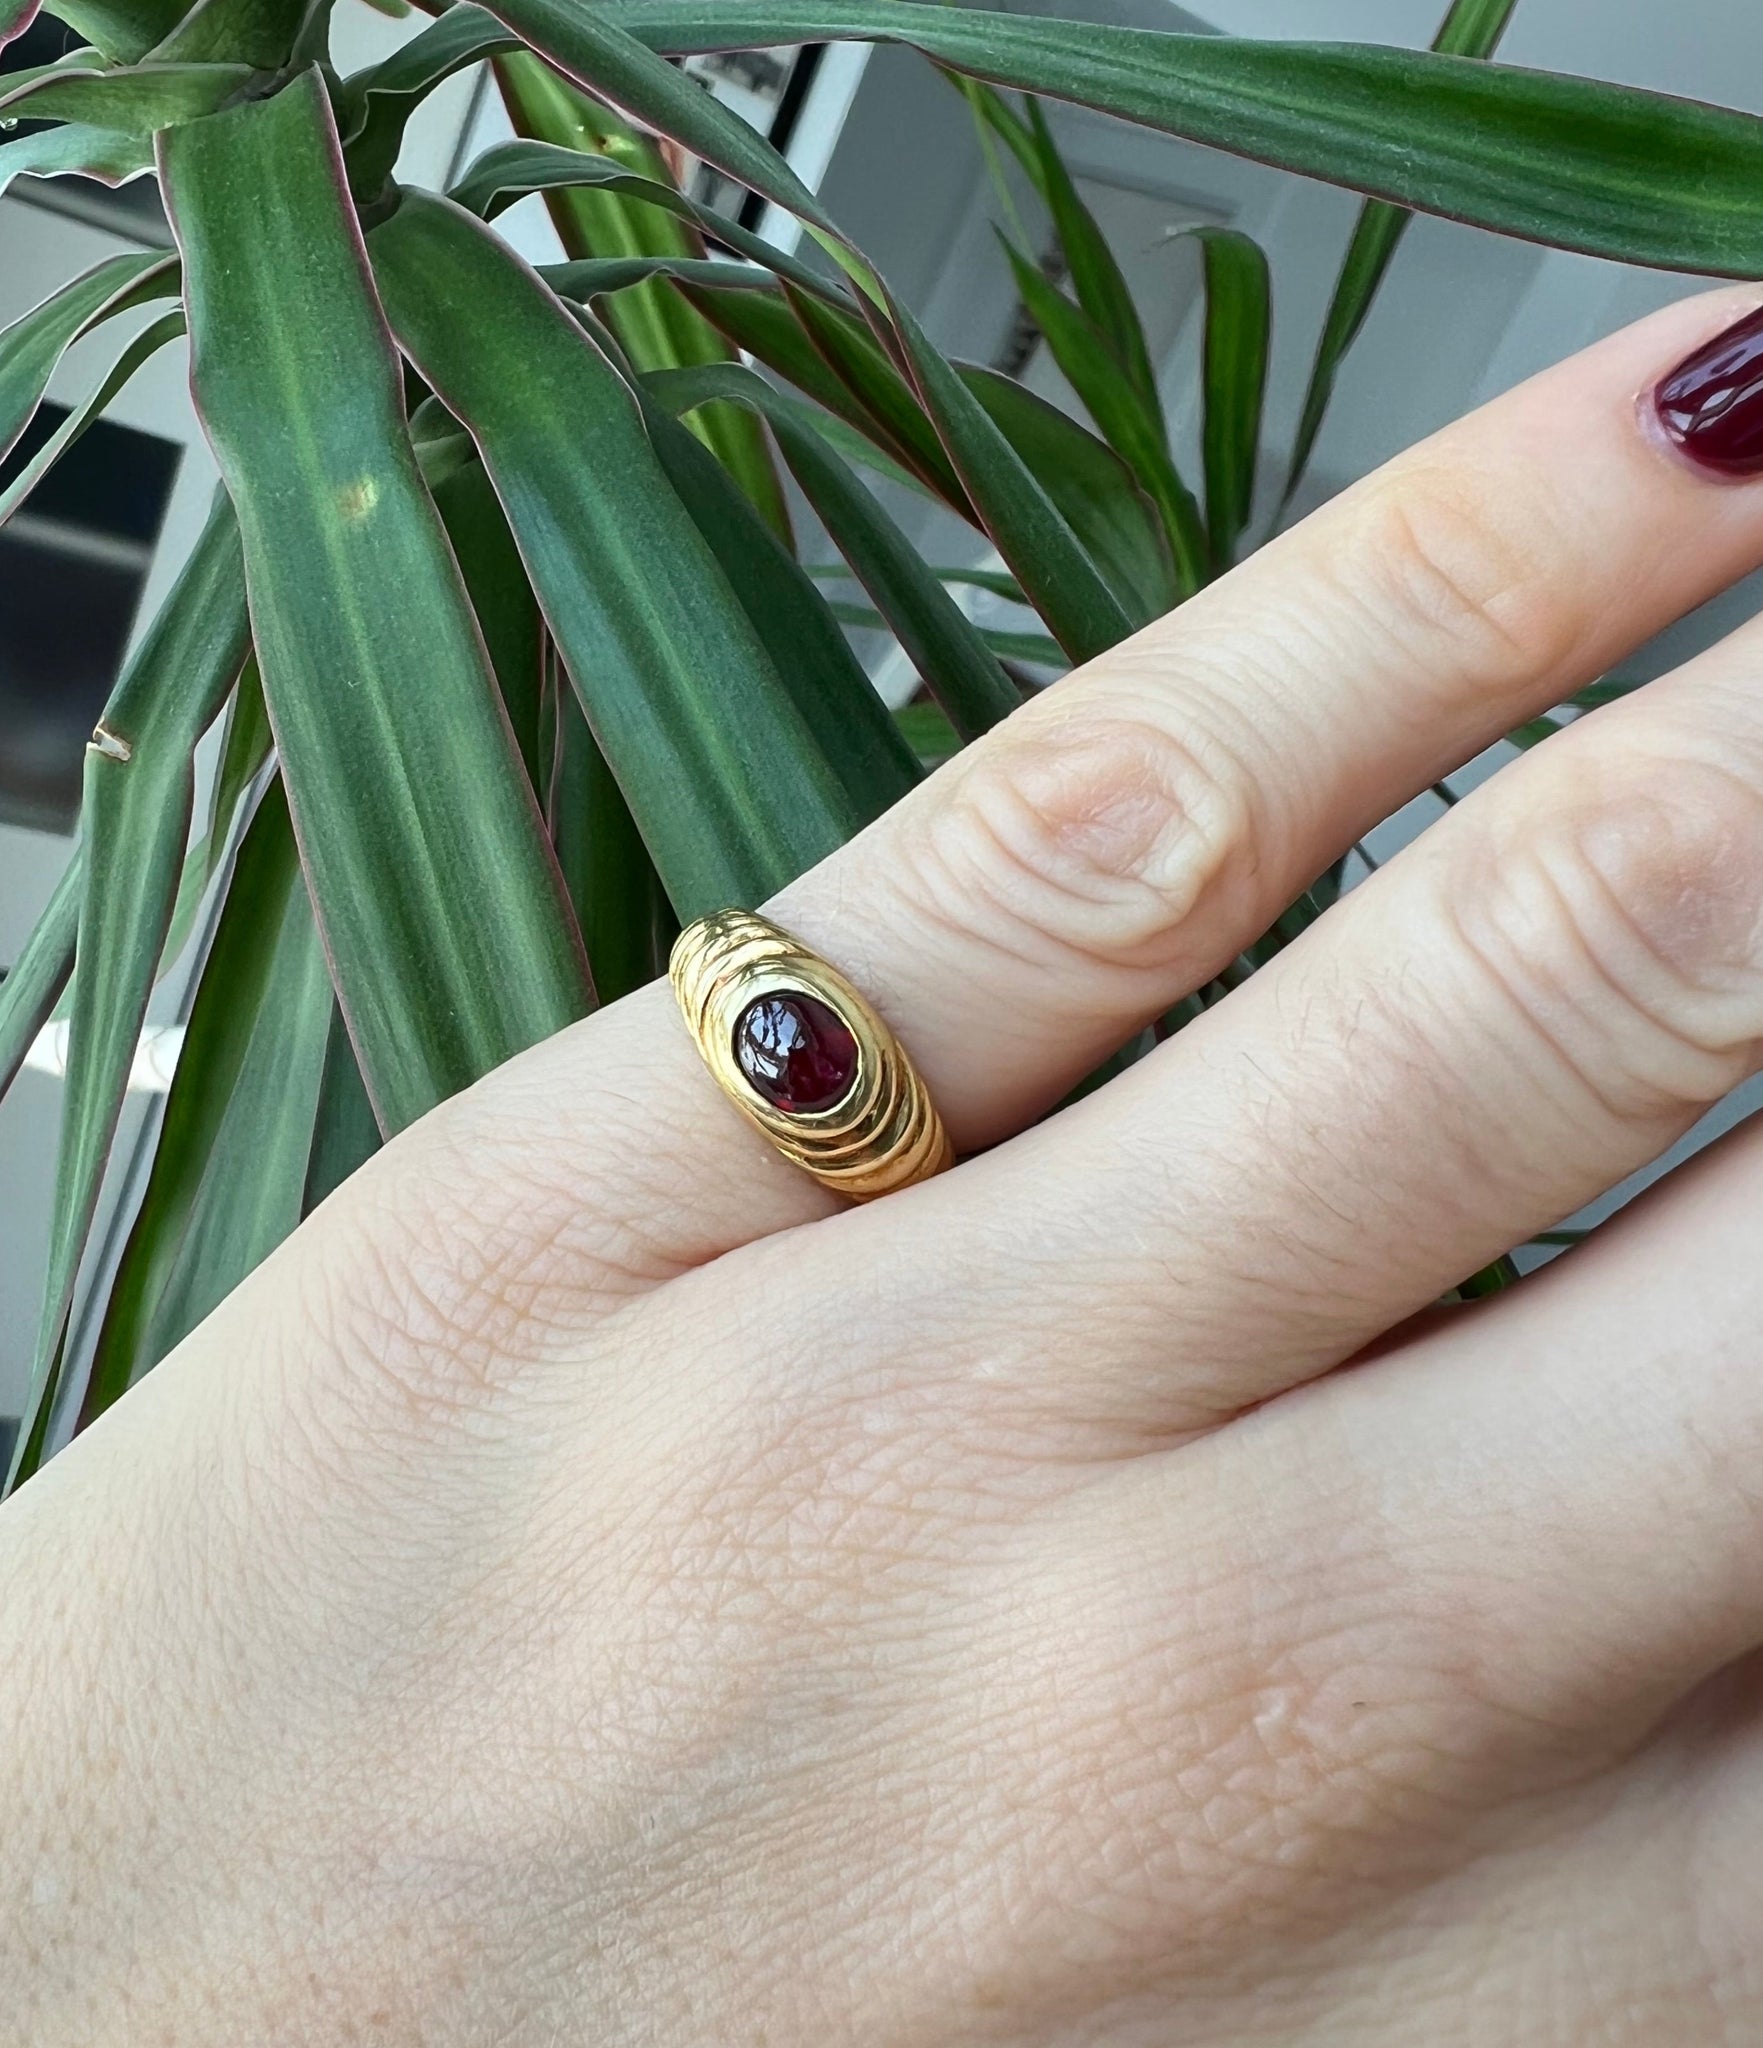 Hand model wearing the vintage 18K cabochon garnet ring on the pinky finger, with a lush green plant in the background.